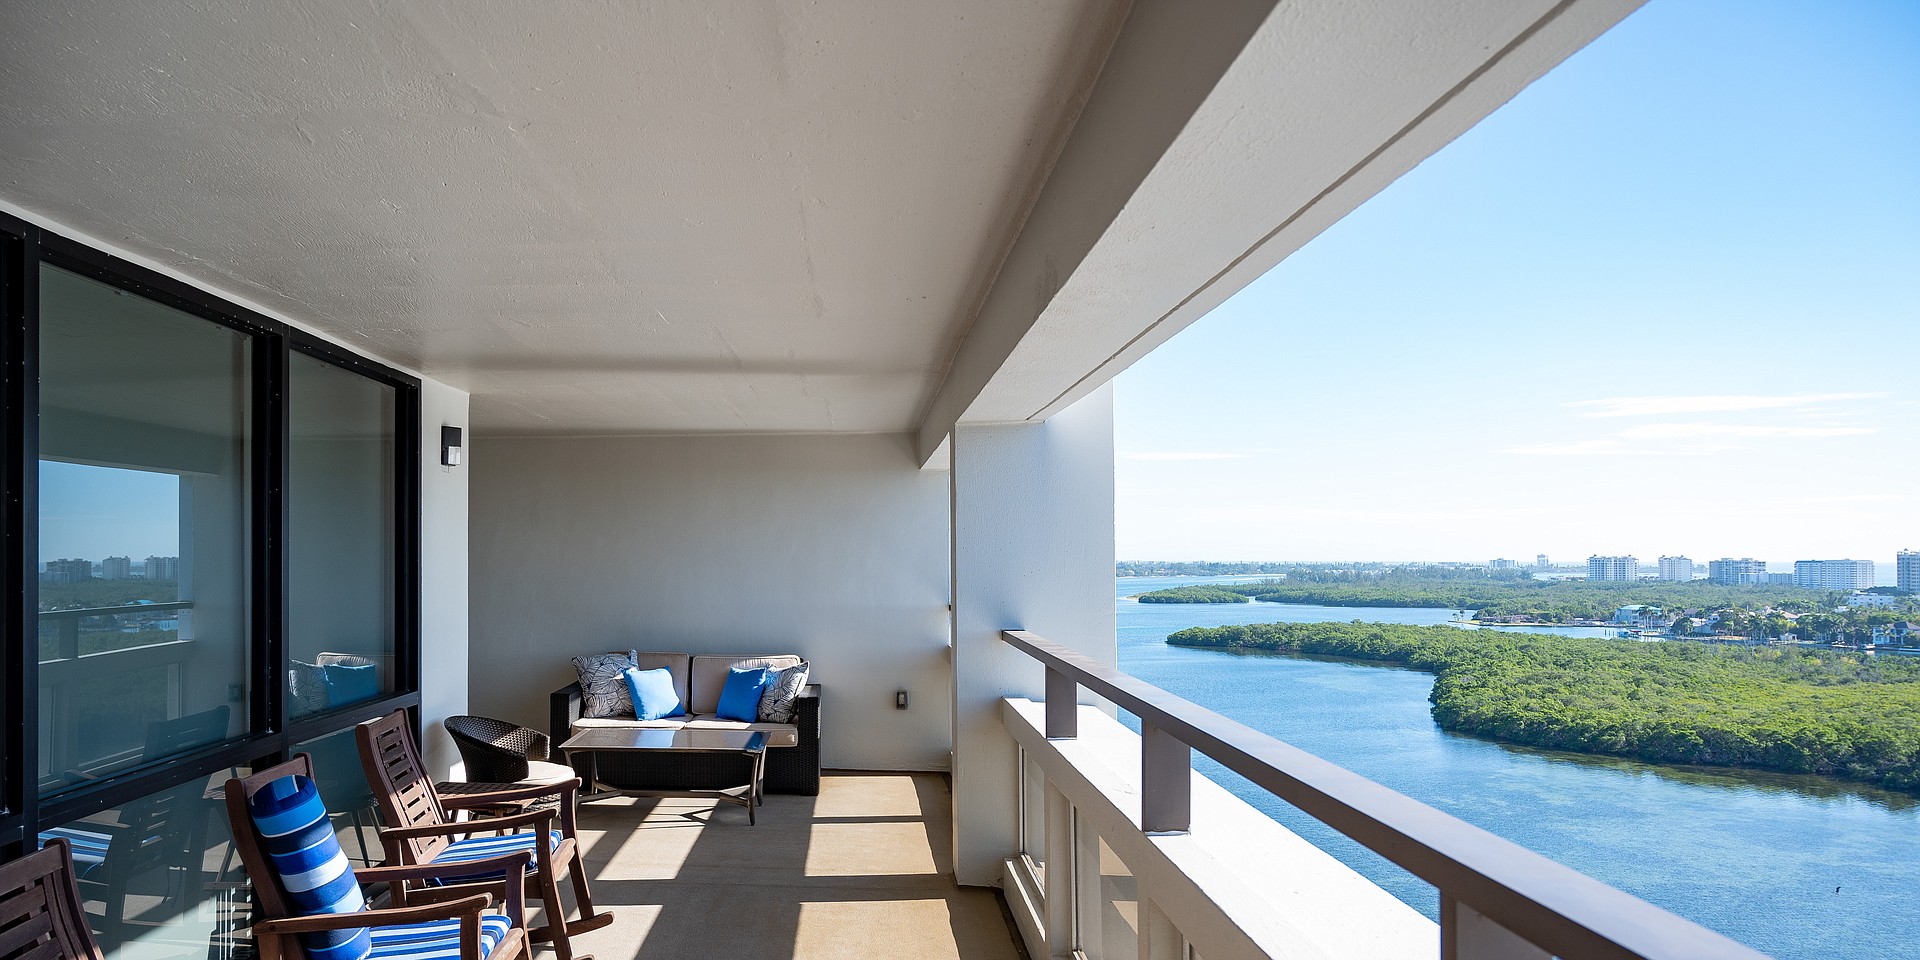 Located on the edge of Sarasota Bay, Plymouth Harbor offers stunning water and city views.